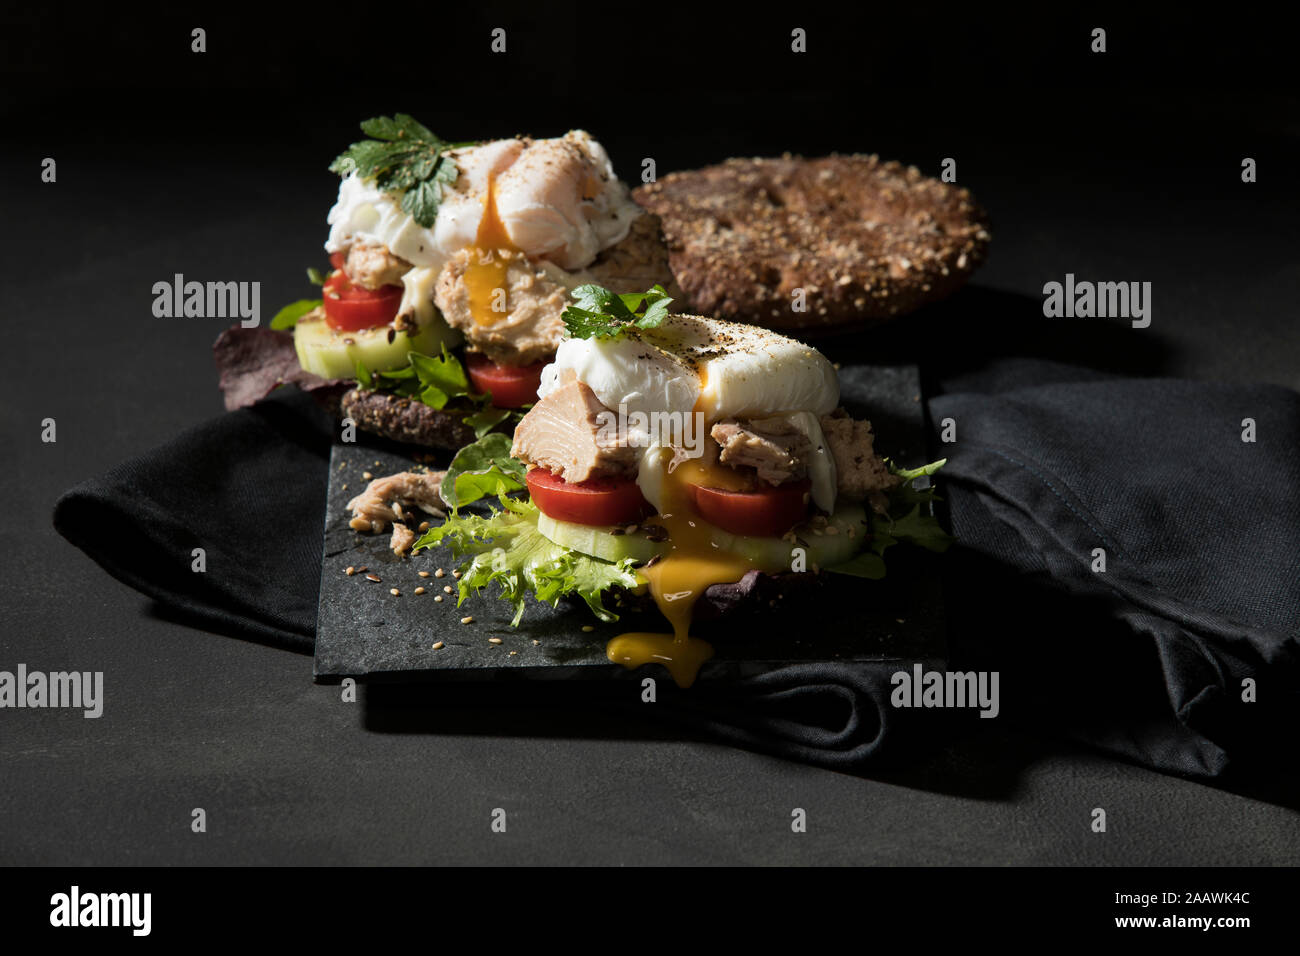 Close-up of open faced sandwich served on table against black background Stock Photo